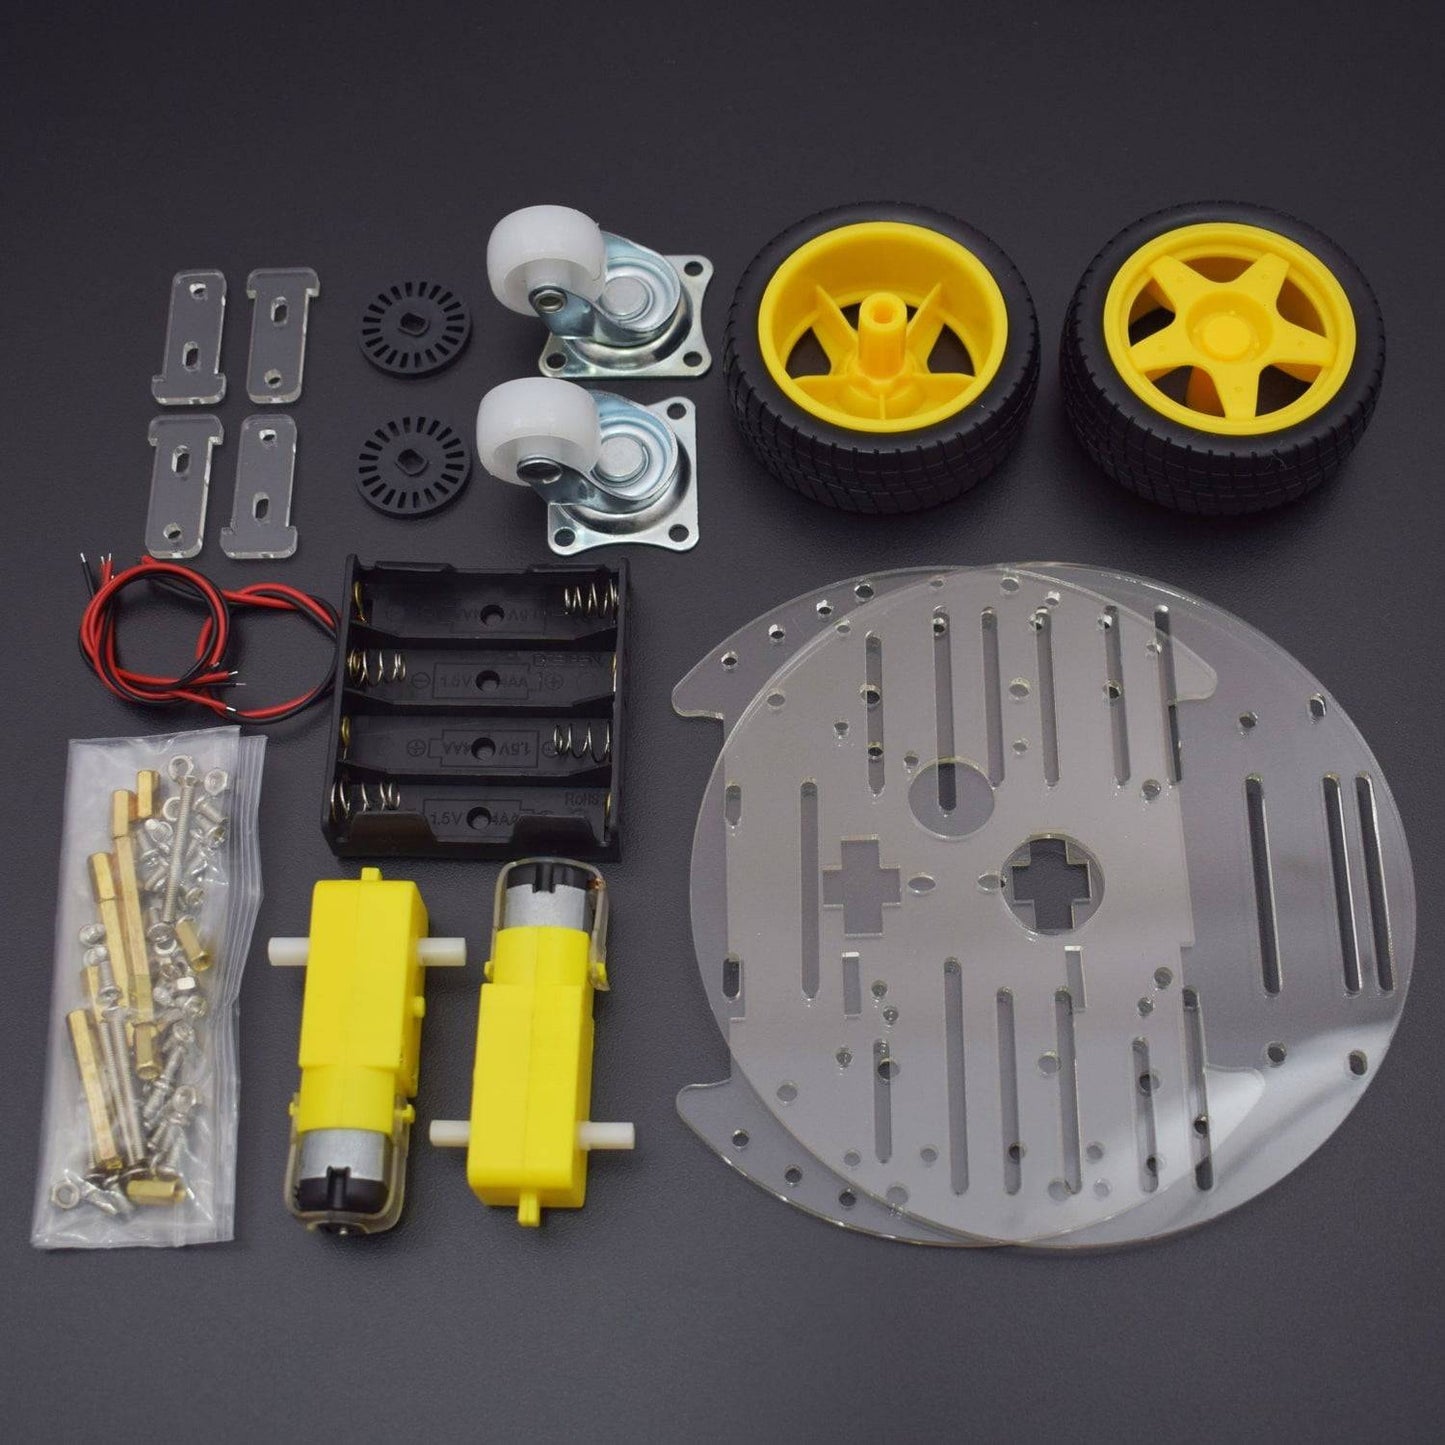 Smart car chassis 2wd / robot tracing strong magnetic motor car rt-4 / avoidance car with code disk for arduino - RS436 - REES52